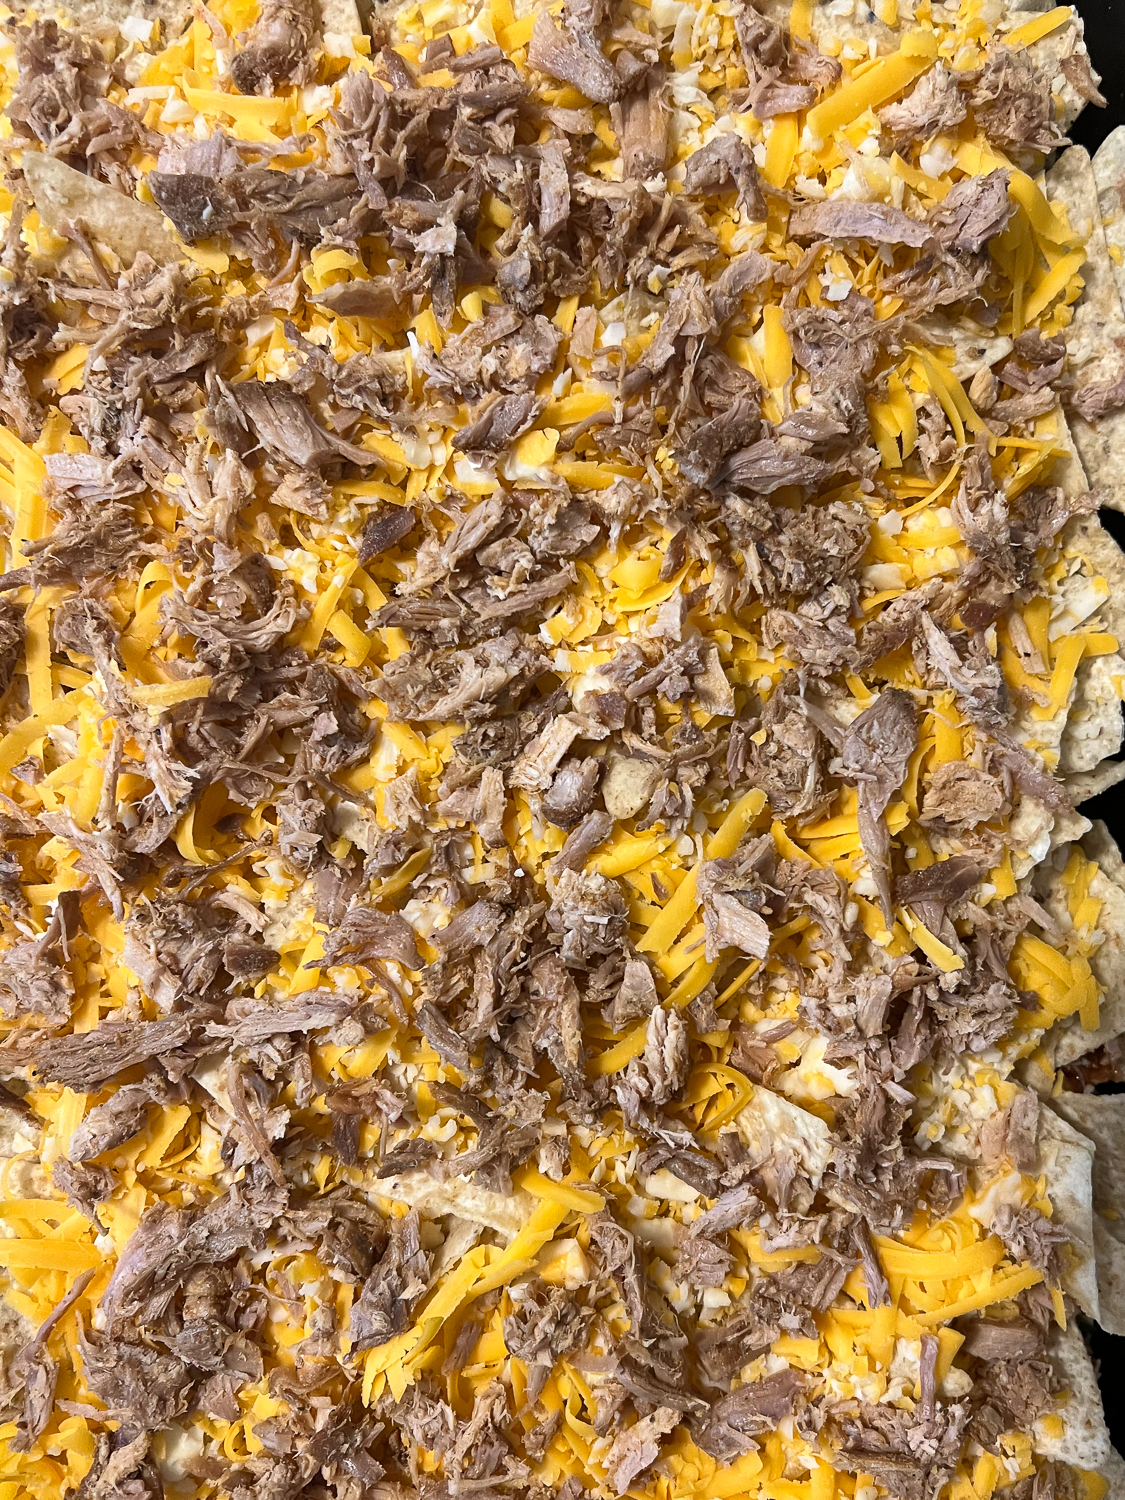 Cheese and pulled pork cover the entire pan.